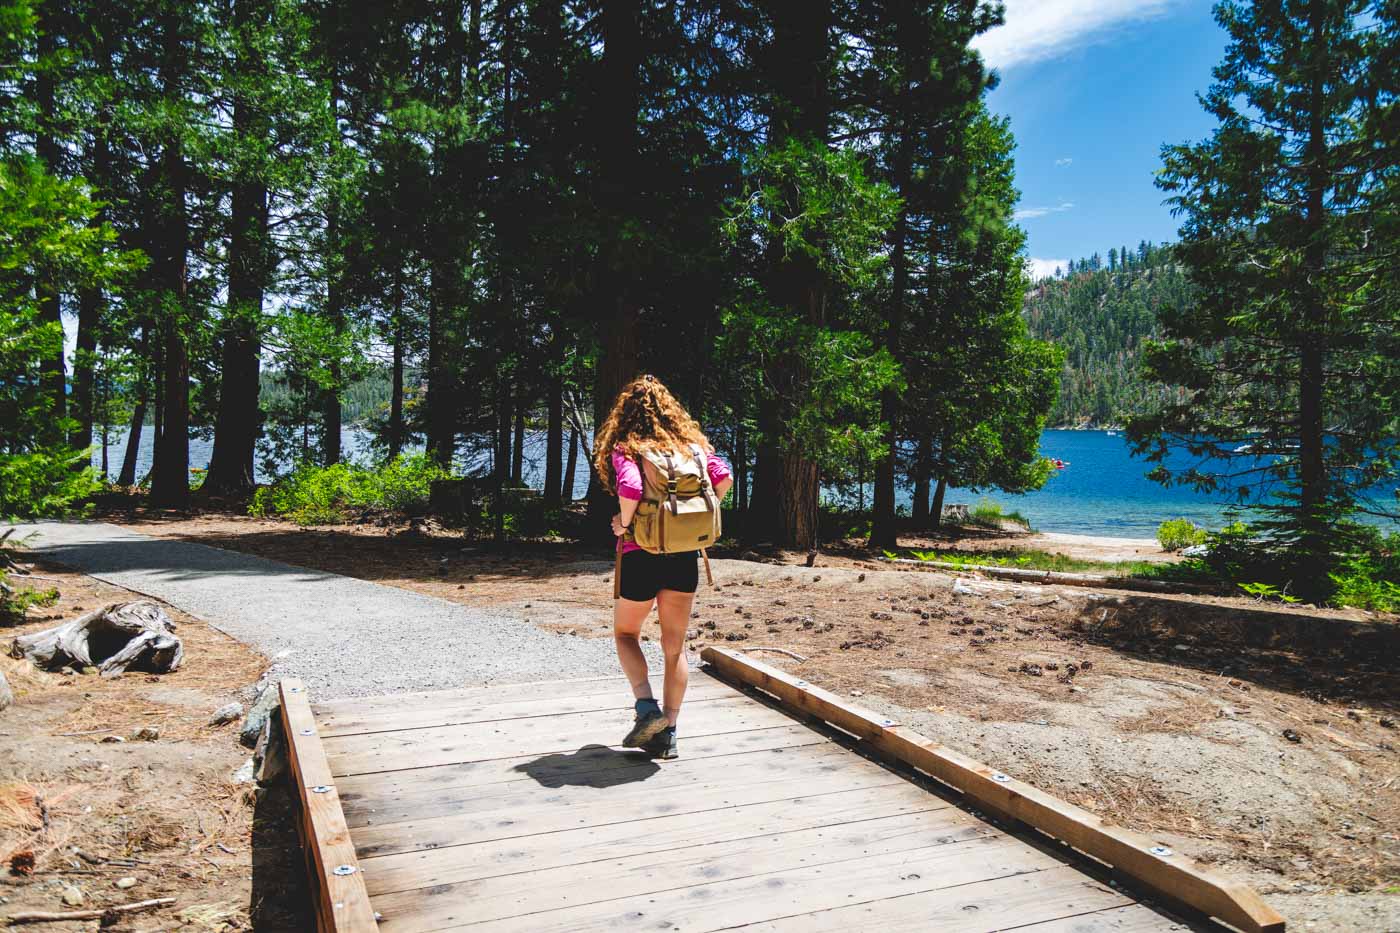 Nina crossing a small wooden bridge along the Rubicon Trail besides the lake of Emerald Bay.